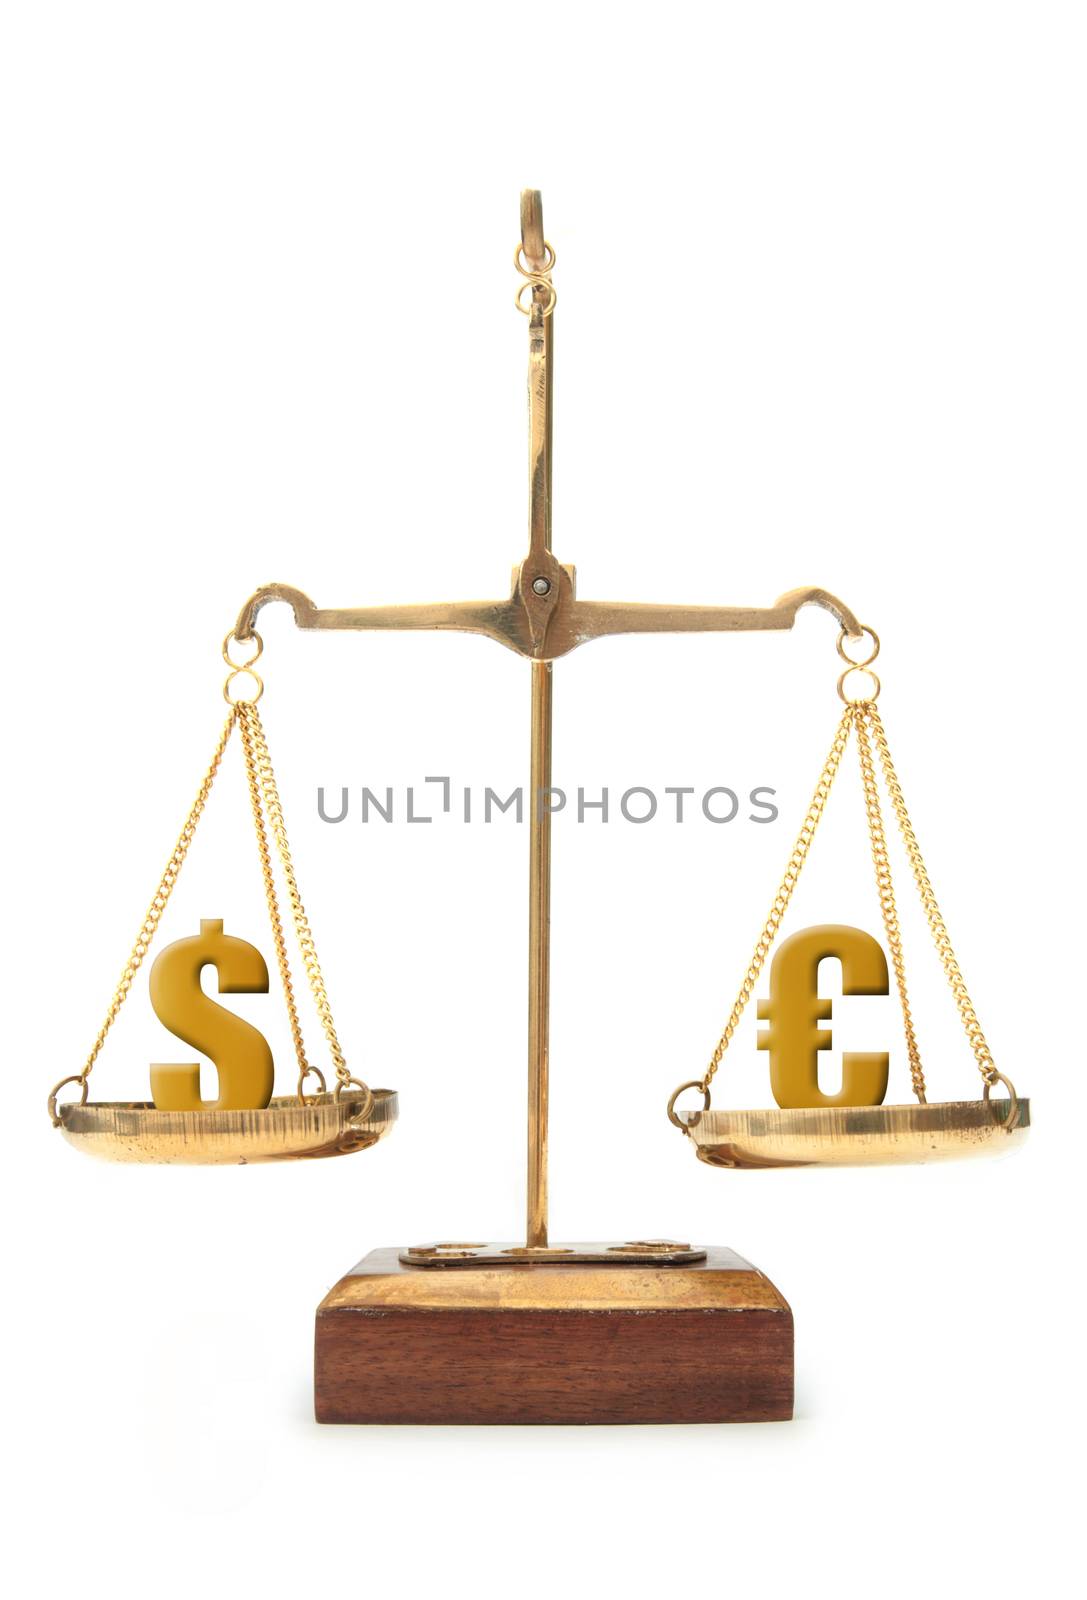 Dollar and euro pound symbols balanced on weighing scales 